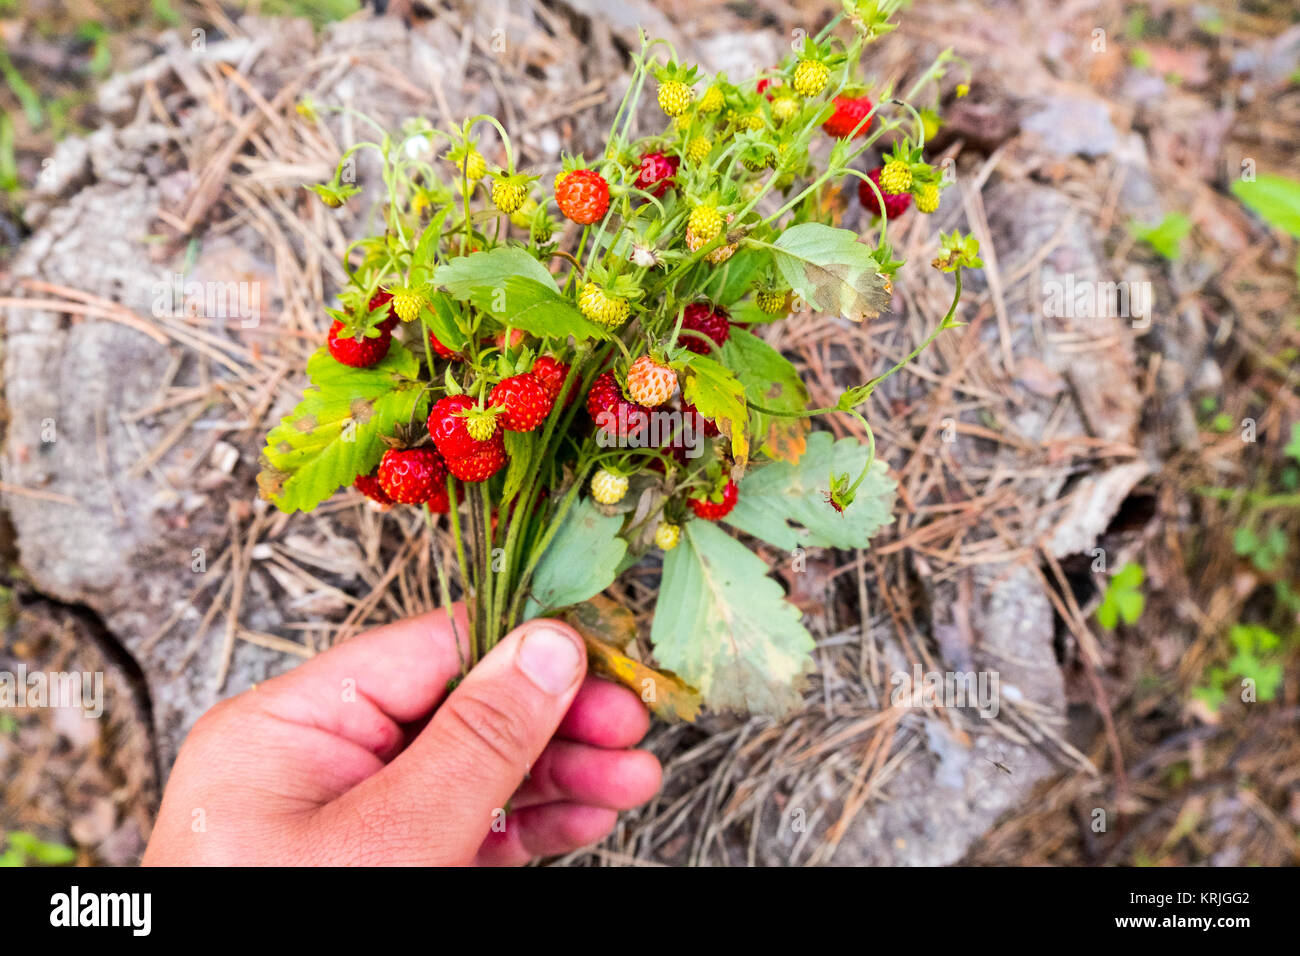 Hand holding bouquet of strawberries over tree stump Stock Photo